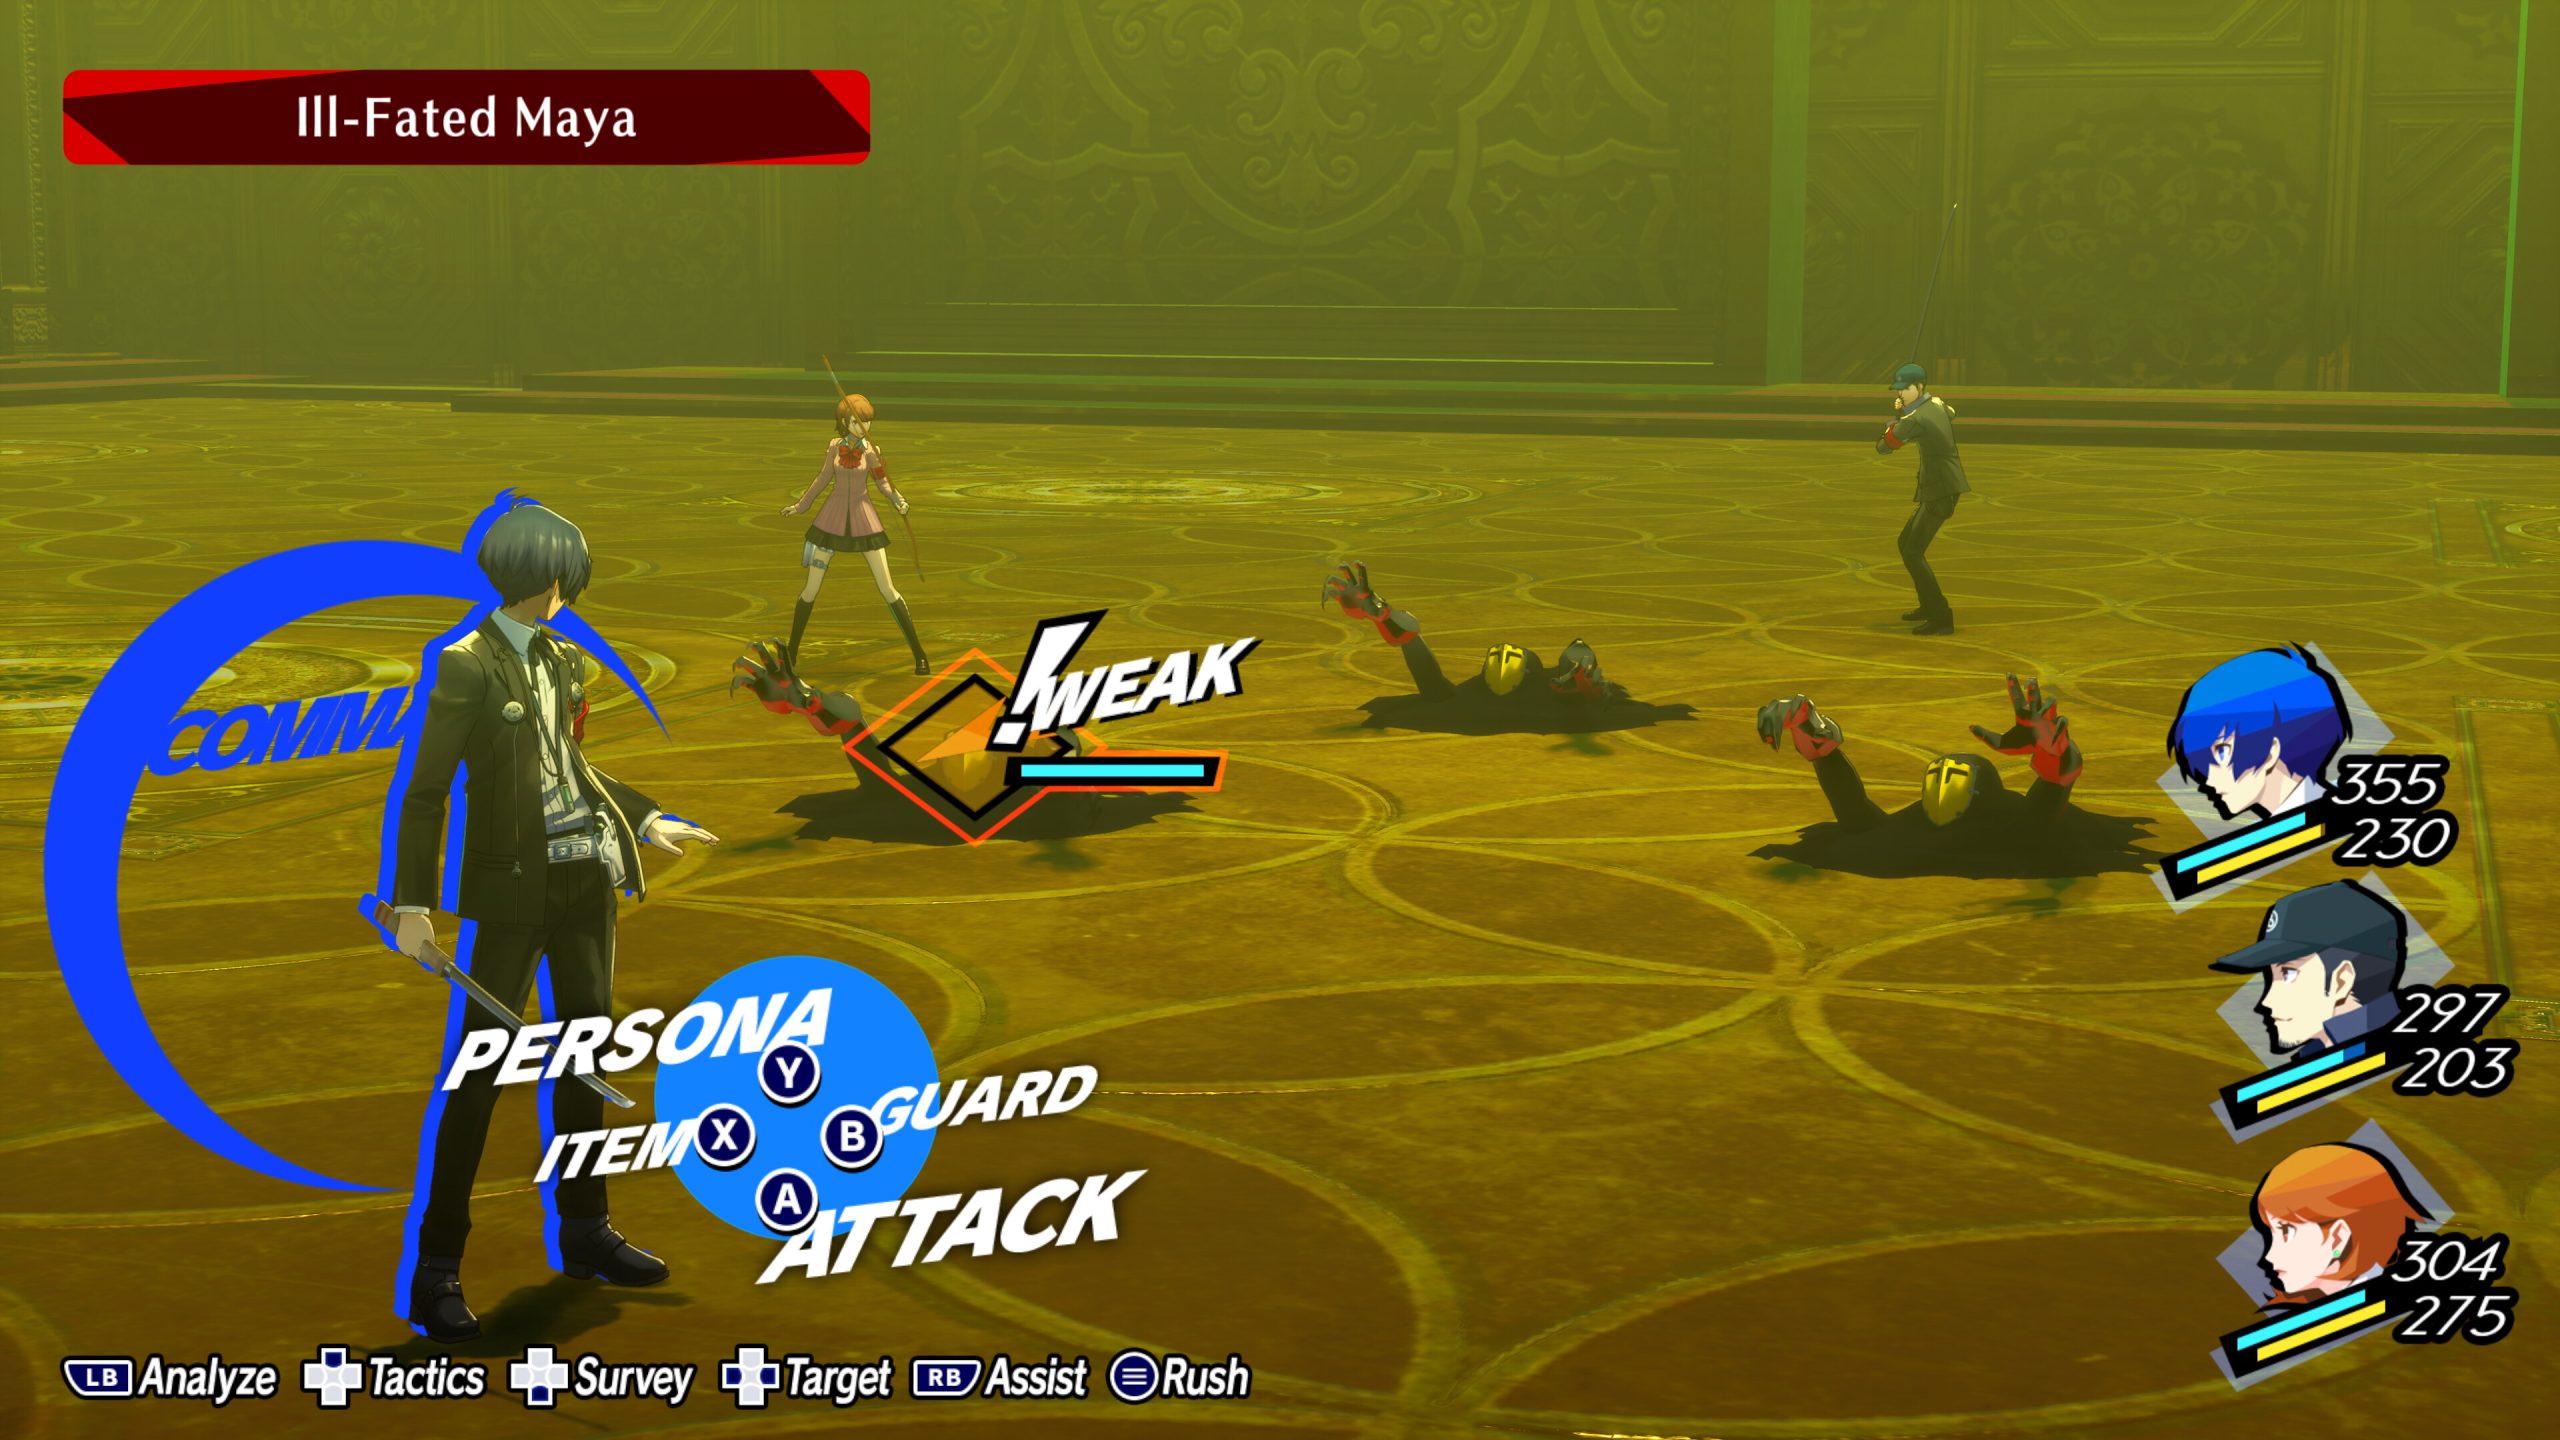 Screenshot from Persona 3 Reload